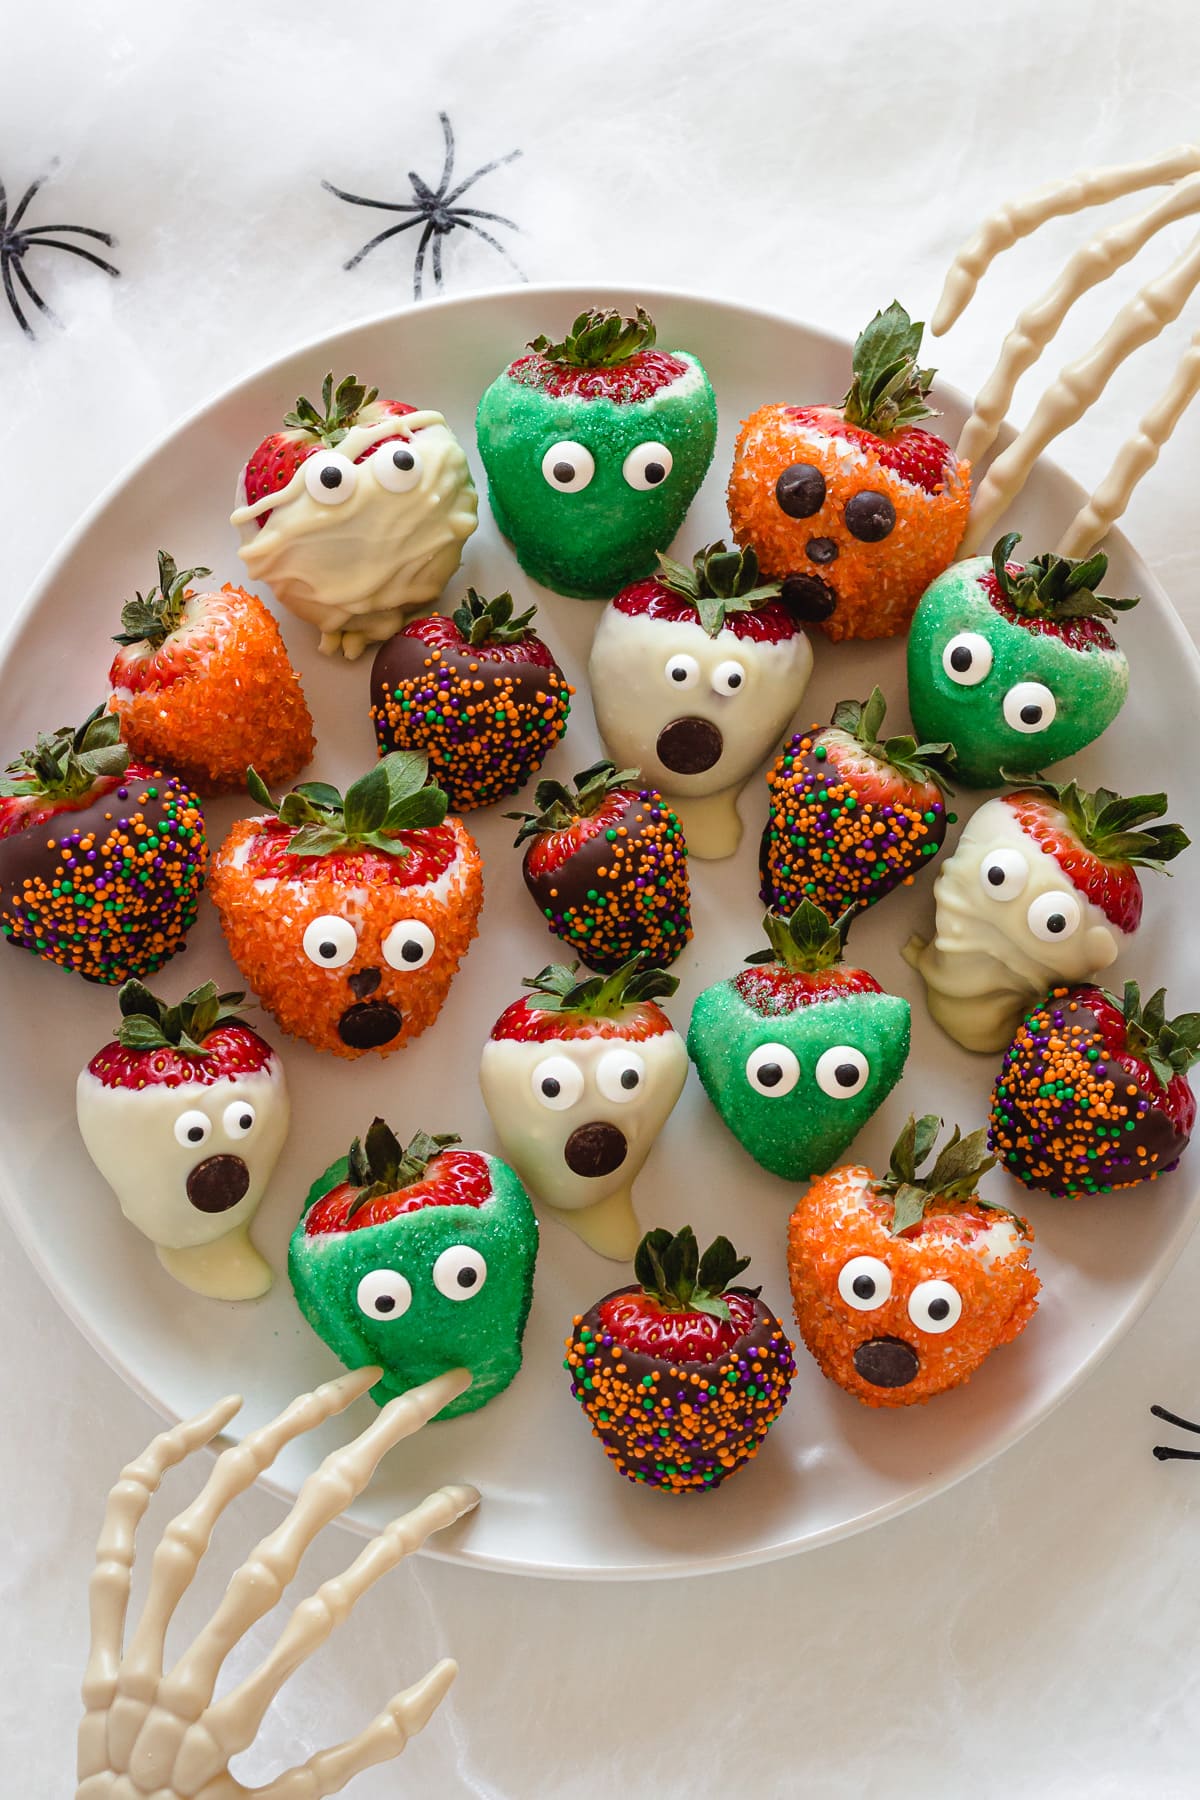 A white platter of spooky Halloween strawberries with two skeleton hands reaching in.